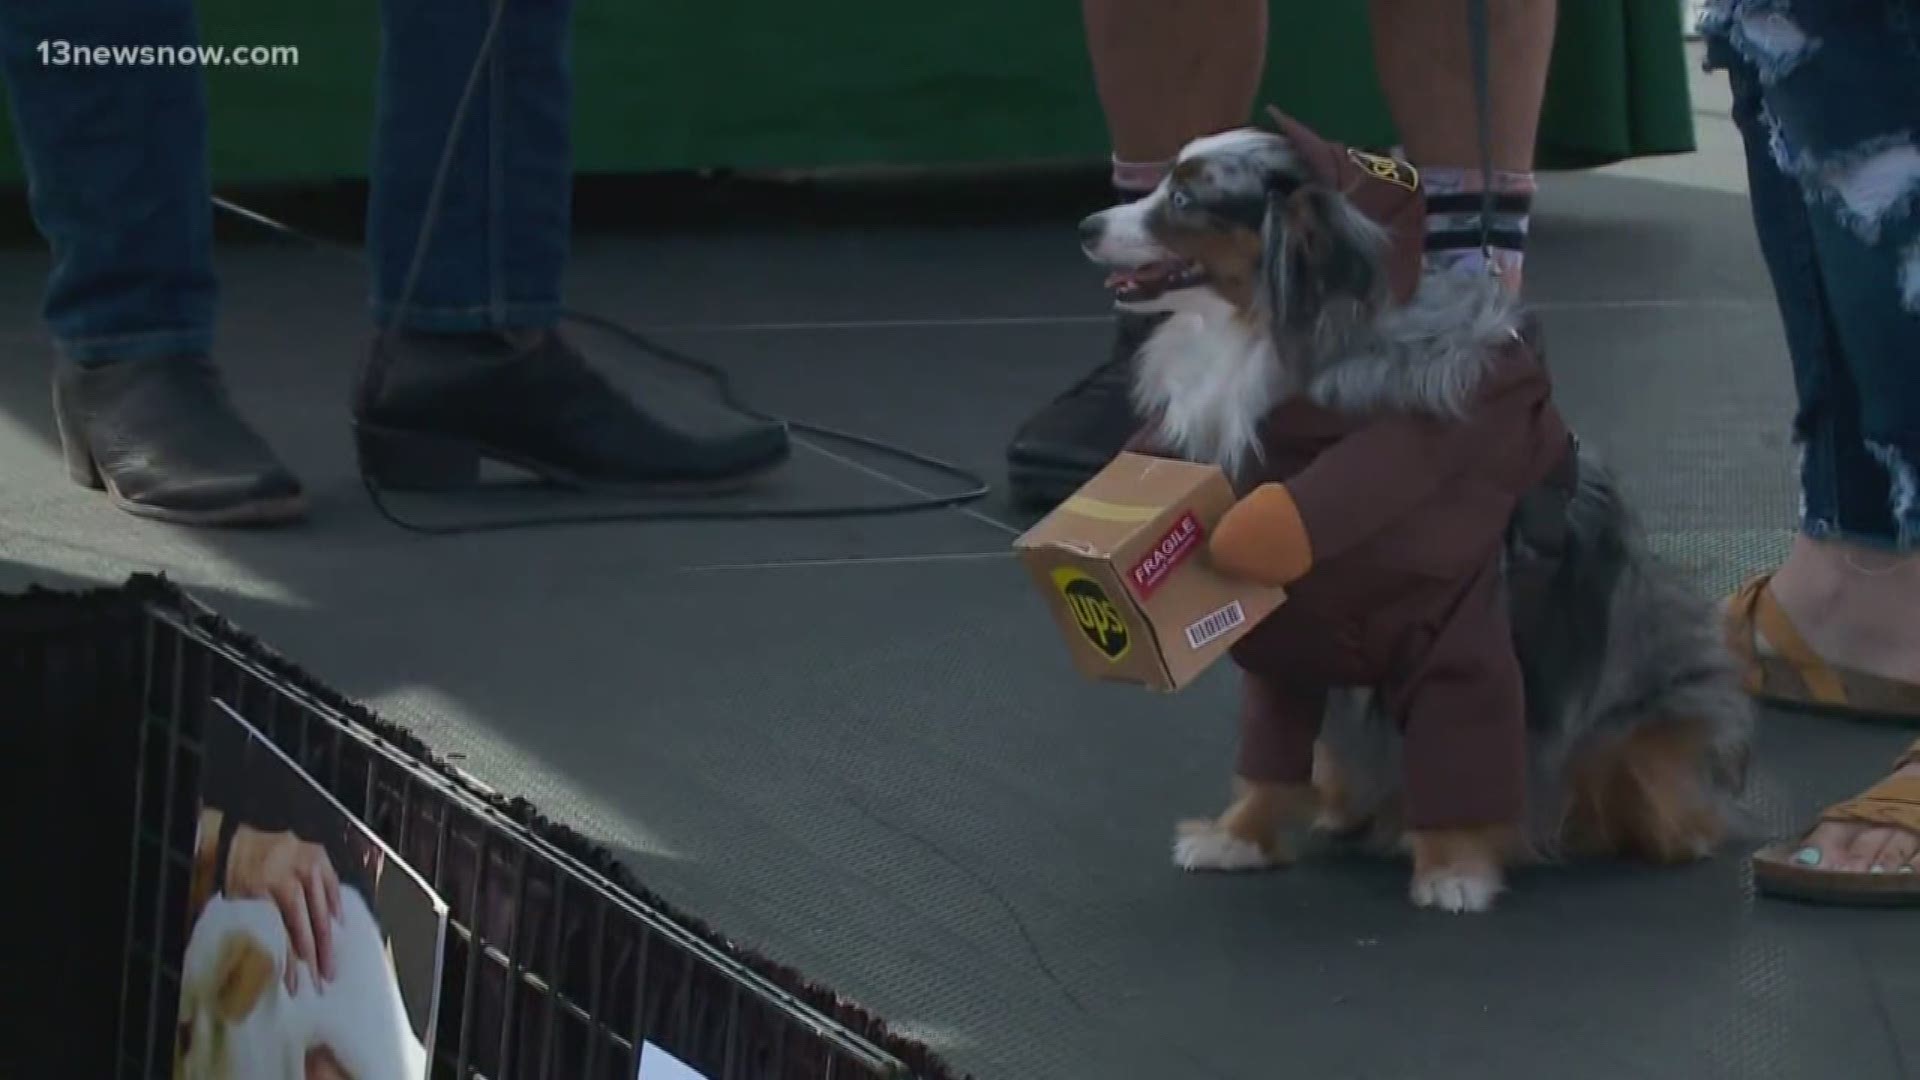 Willow the "UPS driver" won the "Pawchella" pet costume contest on Saturday.